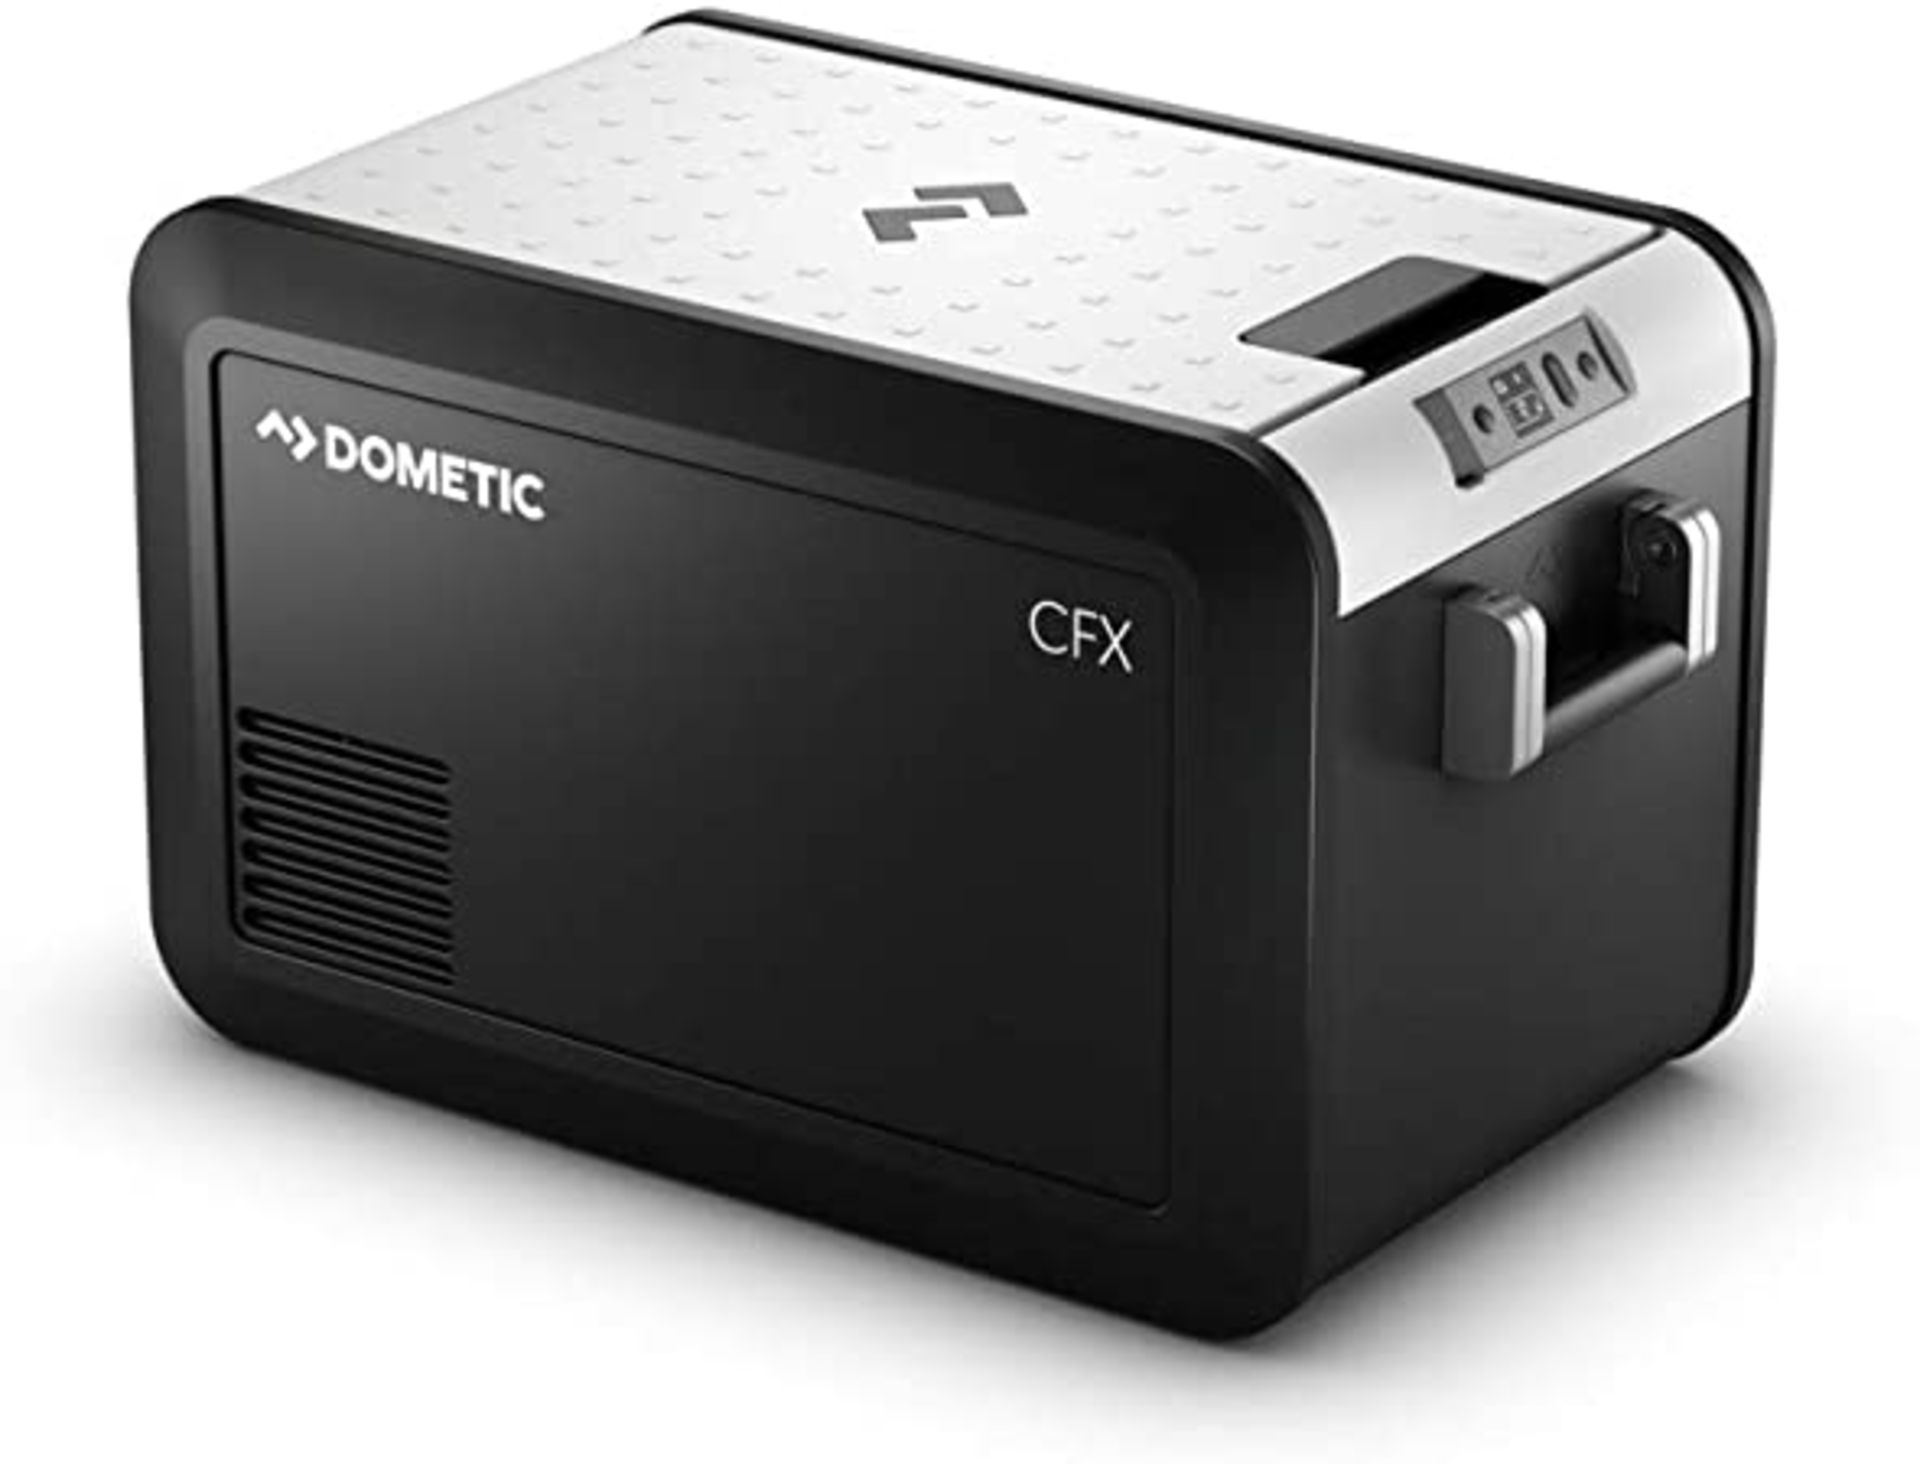 1 x Dometic CFX3 35 Portable 32l Compressor Cooler and Freezer - Features Bluetooth and WiFi - Image 2 of 5